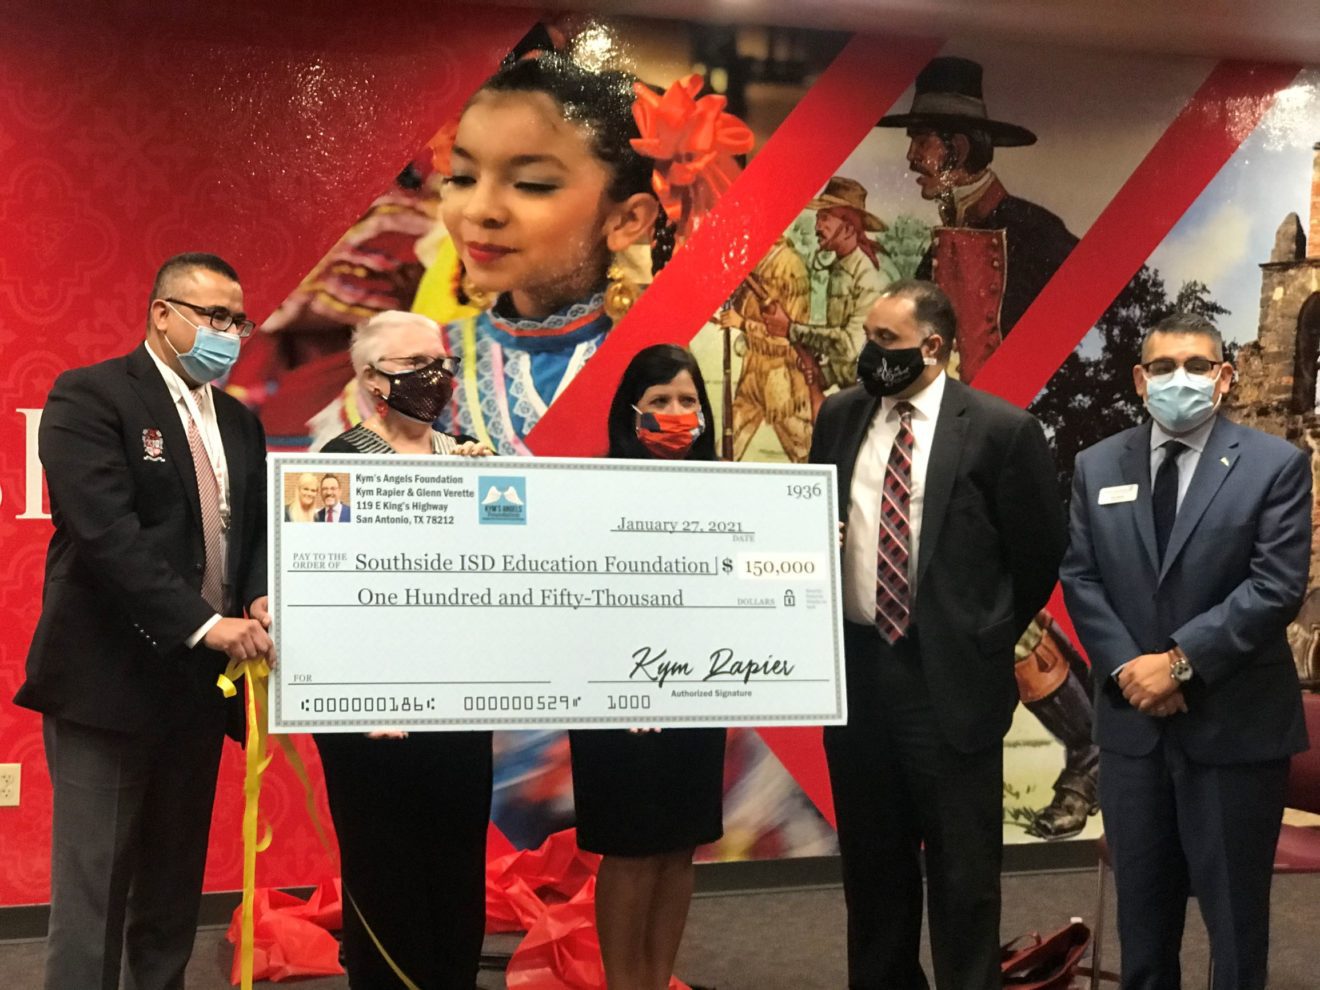 Southside ISD Education Foundation Accepts $150K from Kym's Angels for SISD to tackle Digital Divide